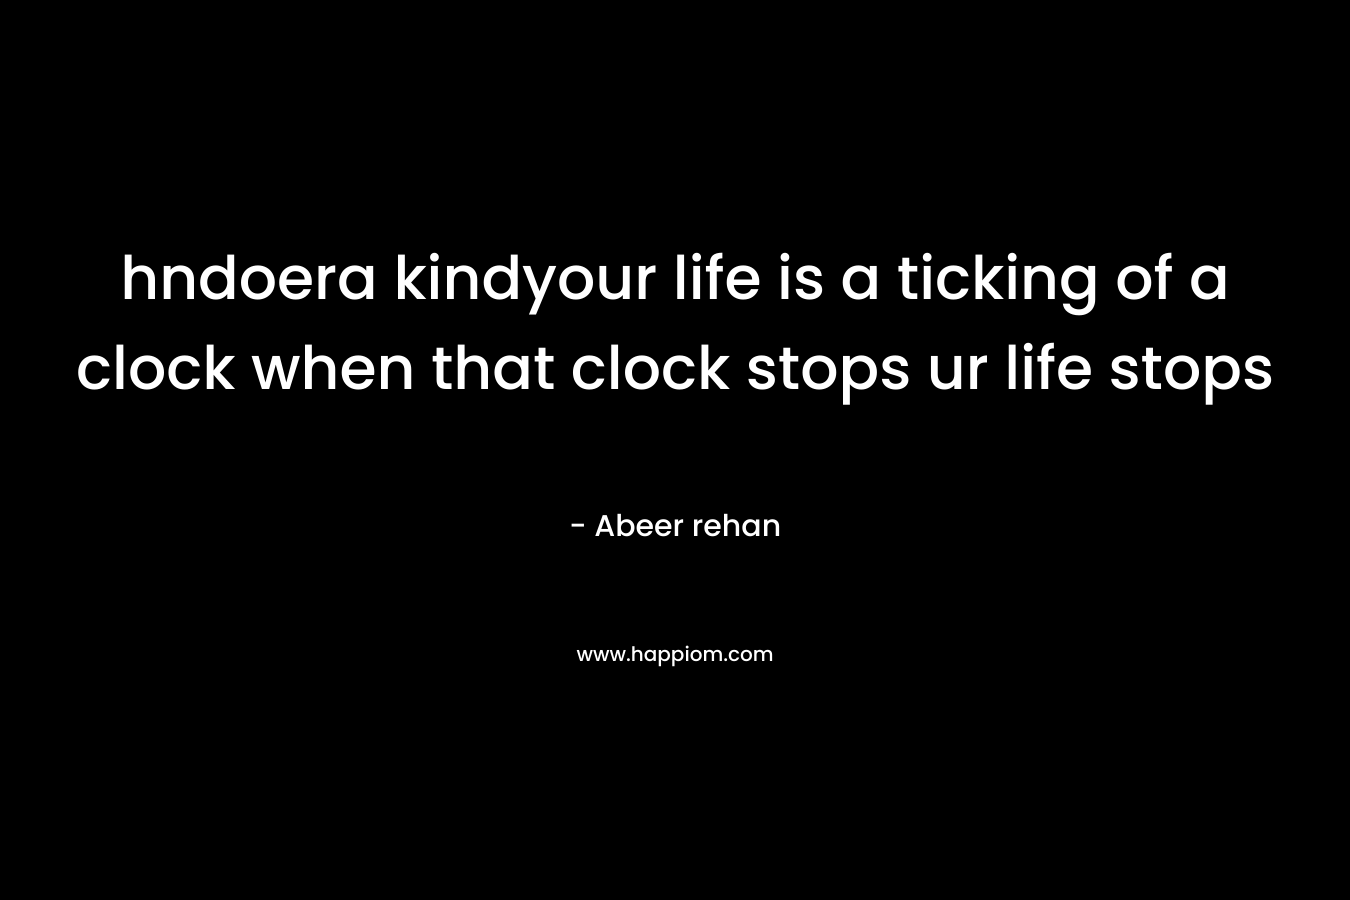 hndoera kindyour life is a ticking of a clock when that clock stops ur life stops – Abeer rehan